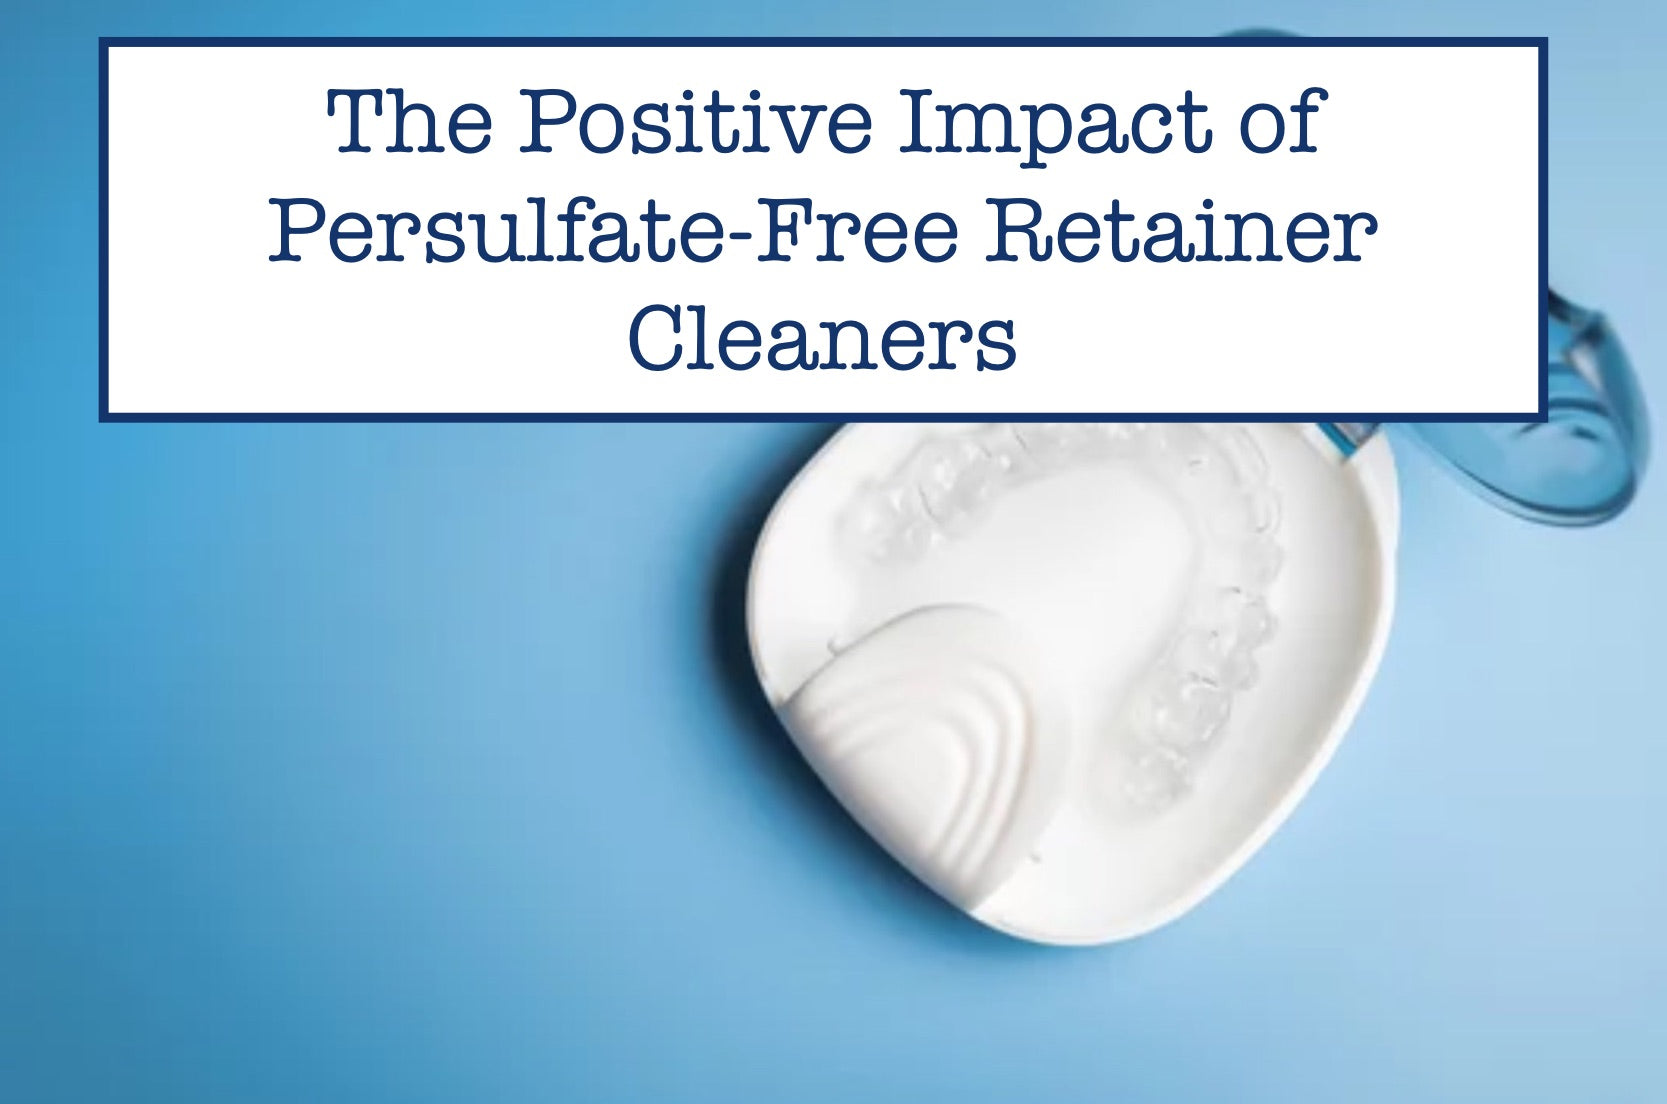 The Positive Impact of Persulfate-Free Retainer Cleaners